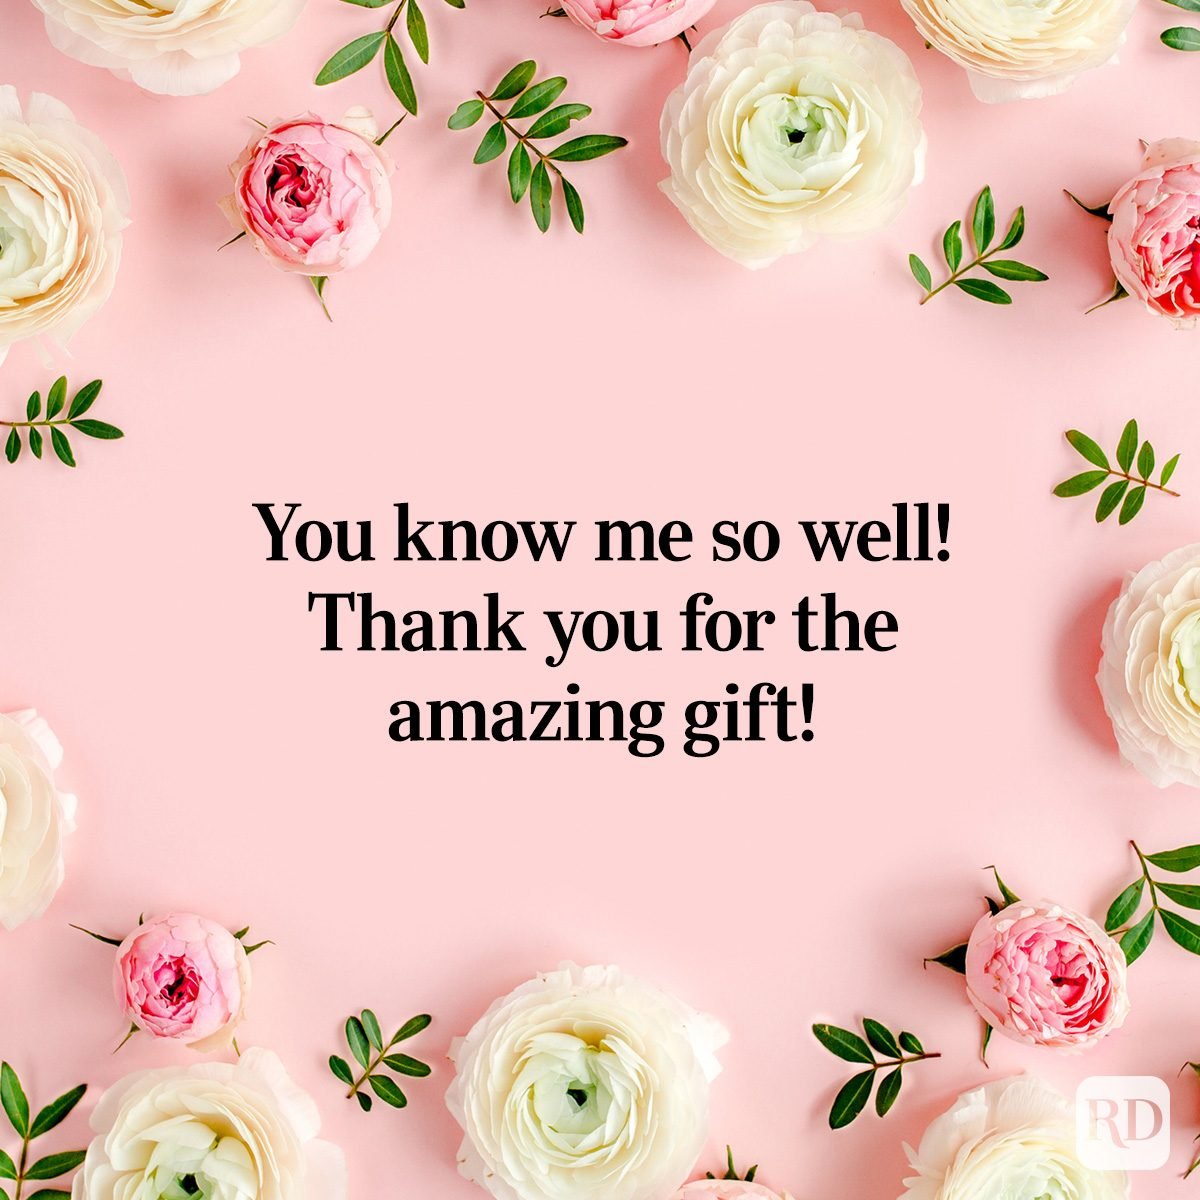 Thank You Messages For Gifts